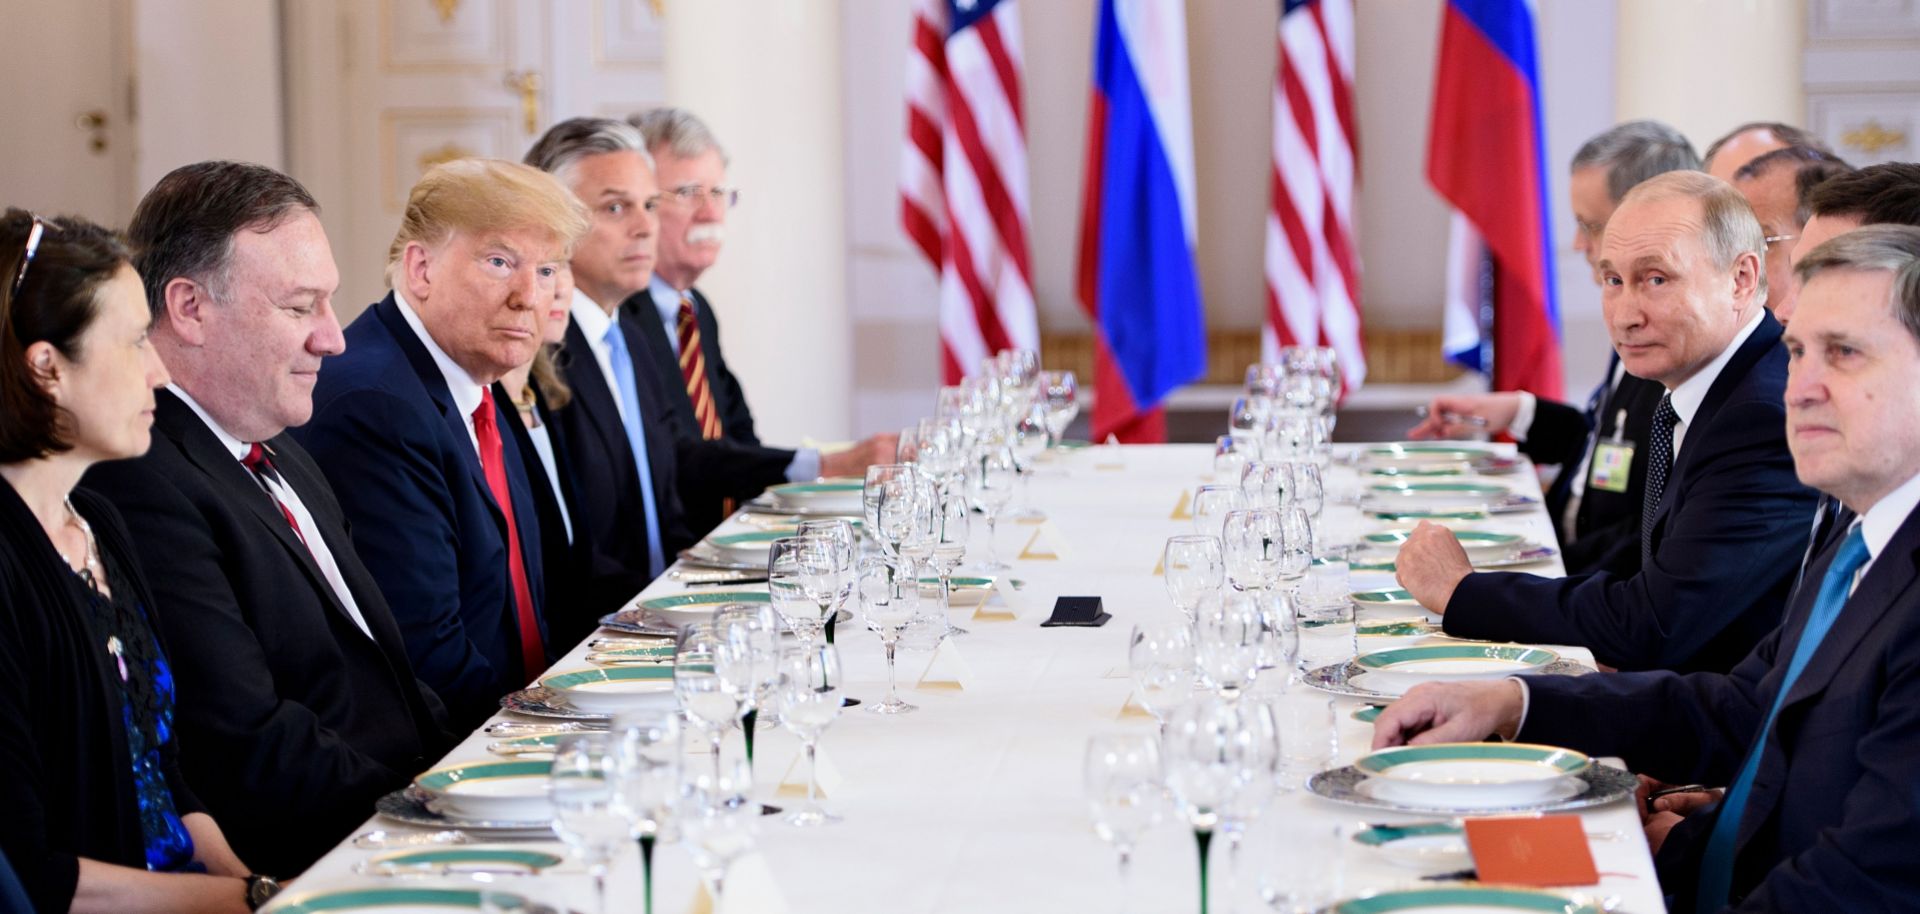 U.S. President Donald Trump (3L), Russian President Vladimir Putin (2R) and others wait for a working lunch meeting at Finland's Presidential Palace on July 16, 2018 in Helsinki. Key topics of their meeting will include sanctions, arms control, and the conflicts in Ukraine and Syria.